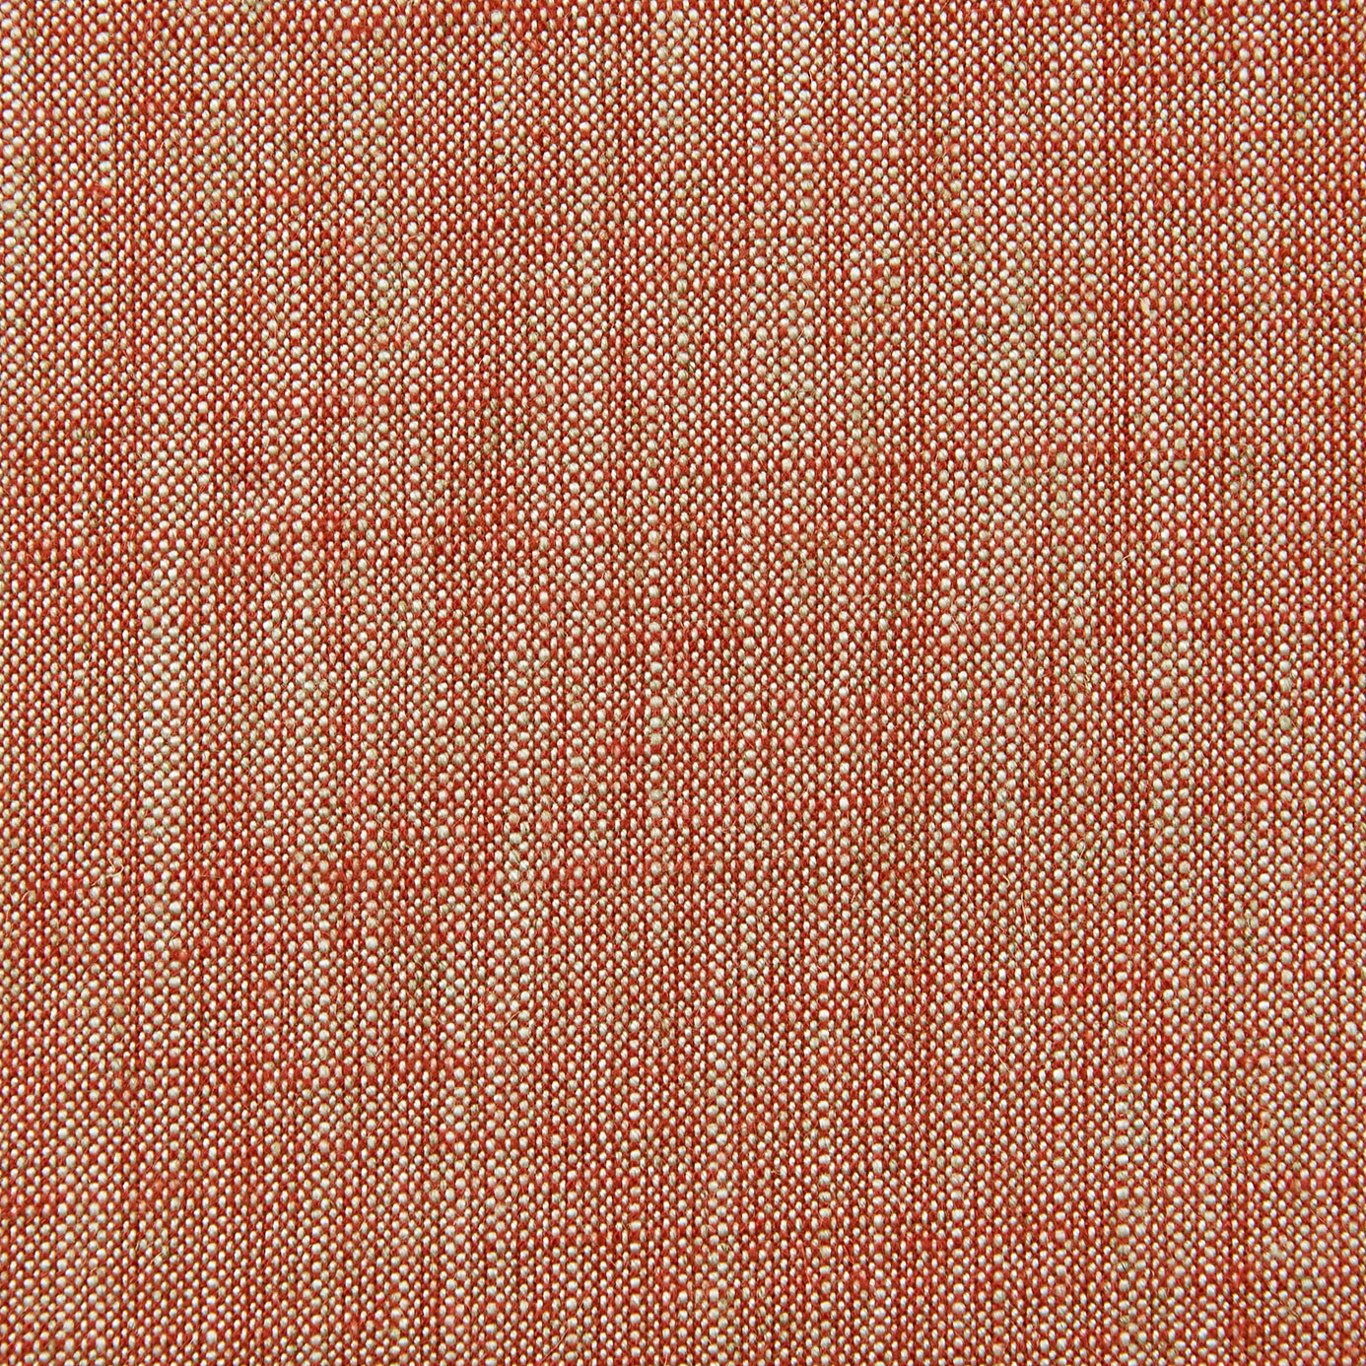 Biarritz Spice Fabric by CNC